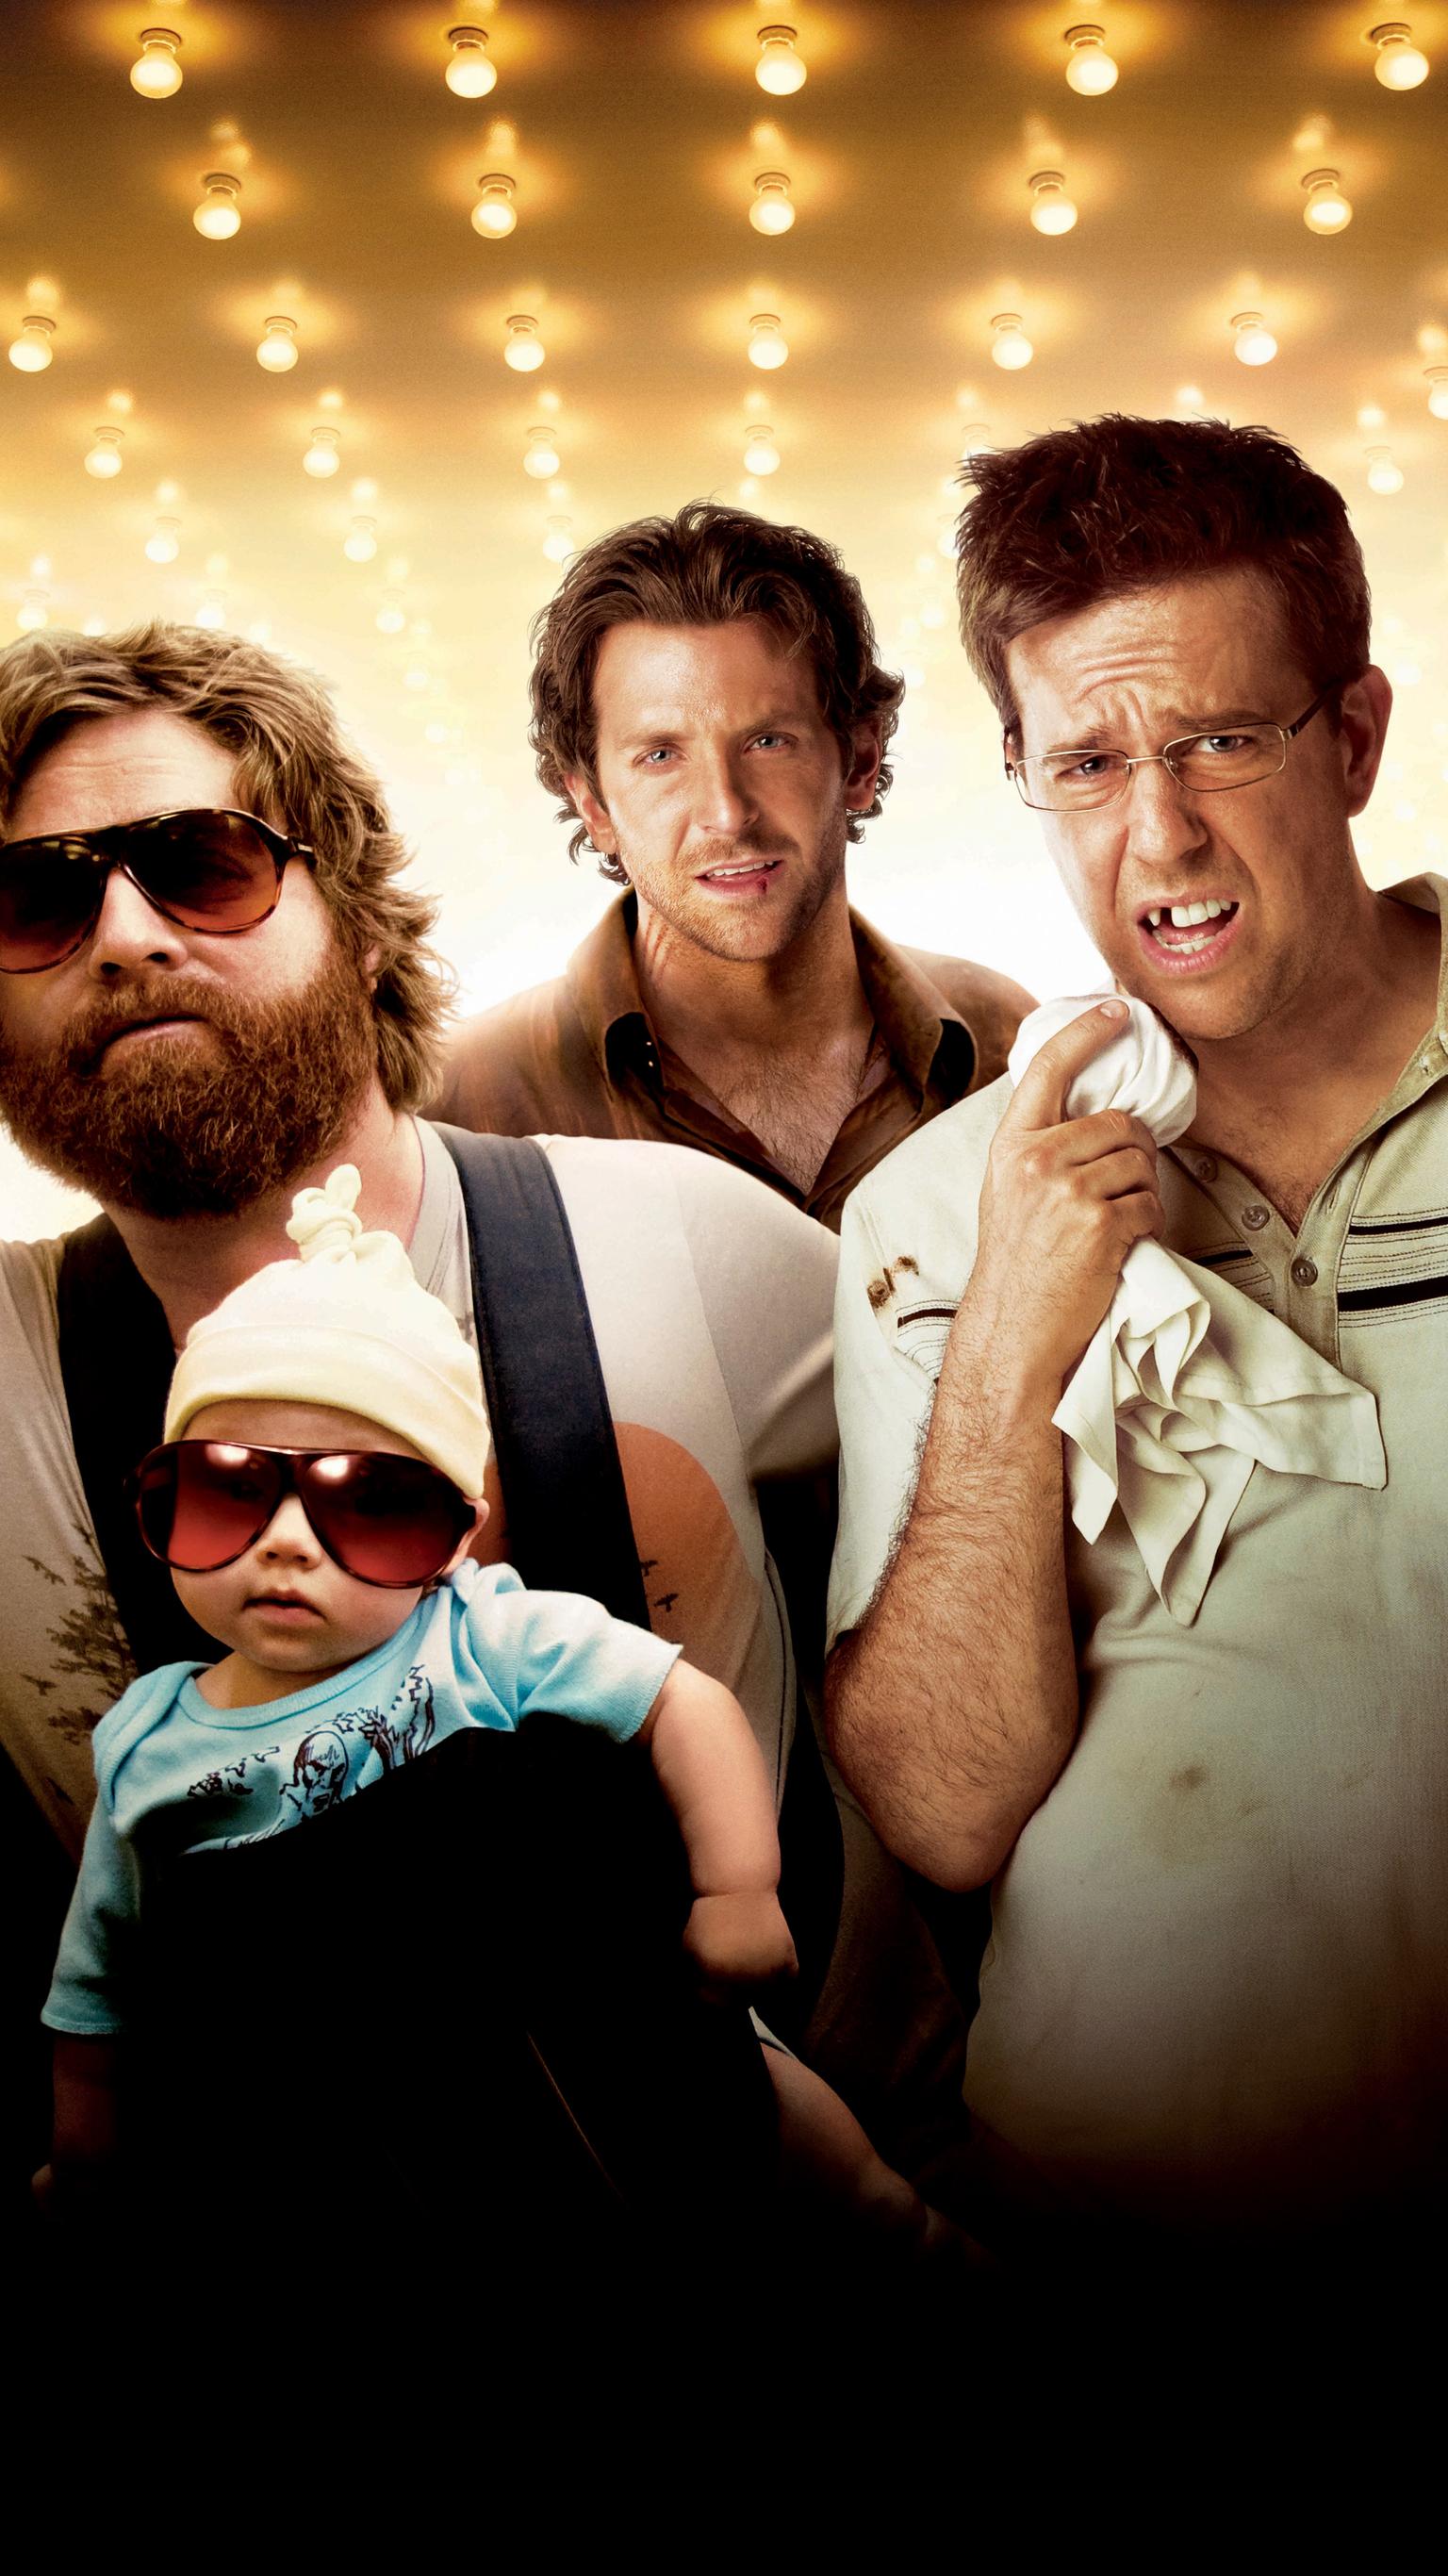 The Hangover Wallpaper Free The Hangover Background